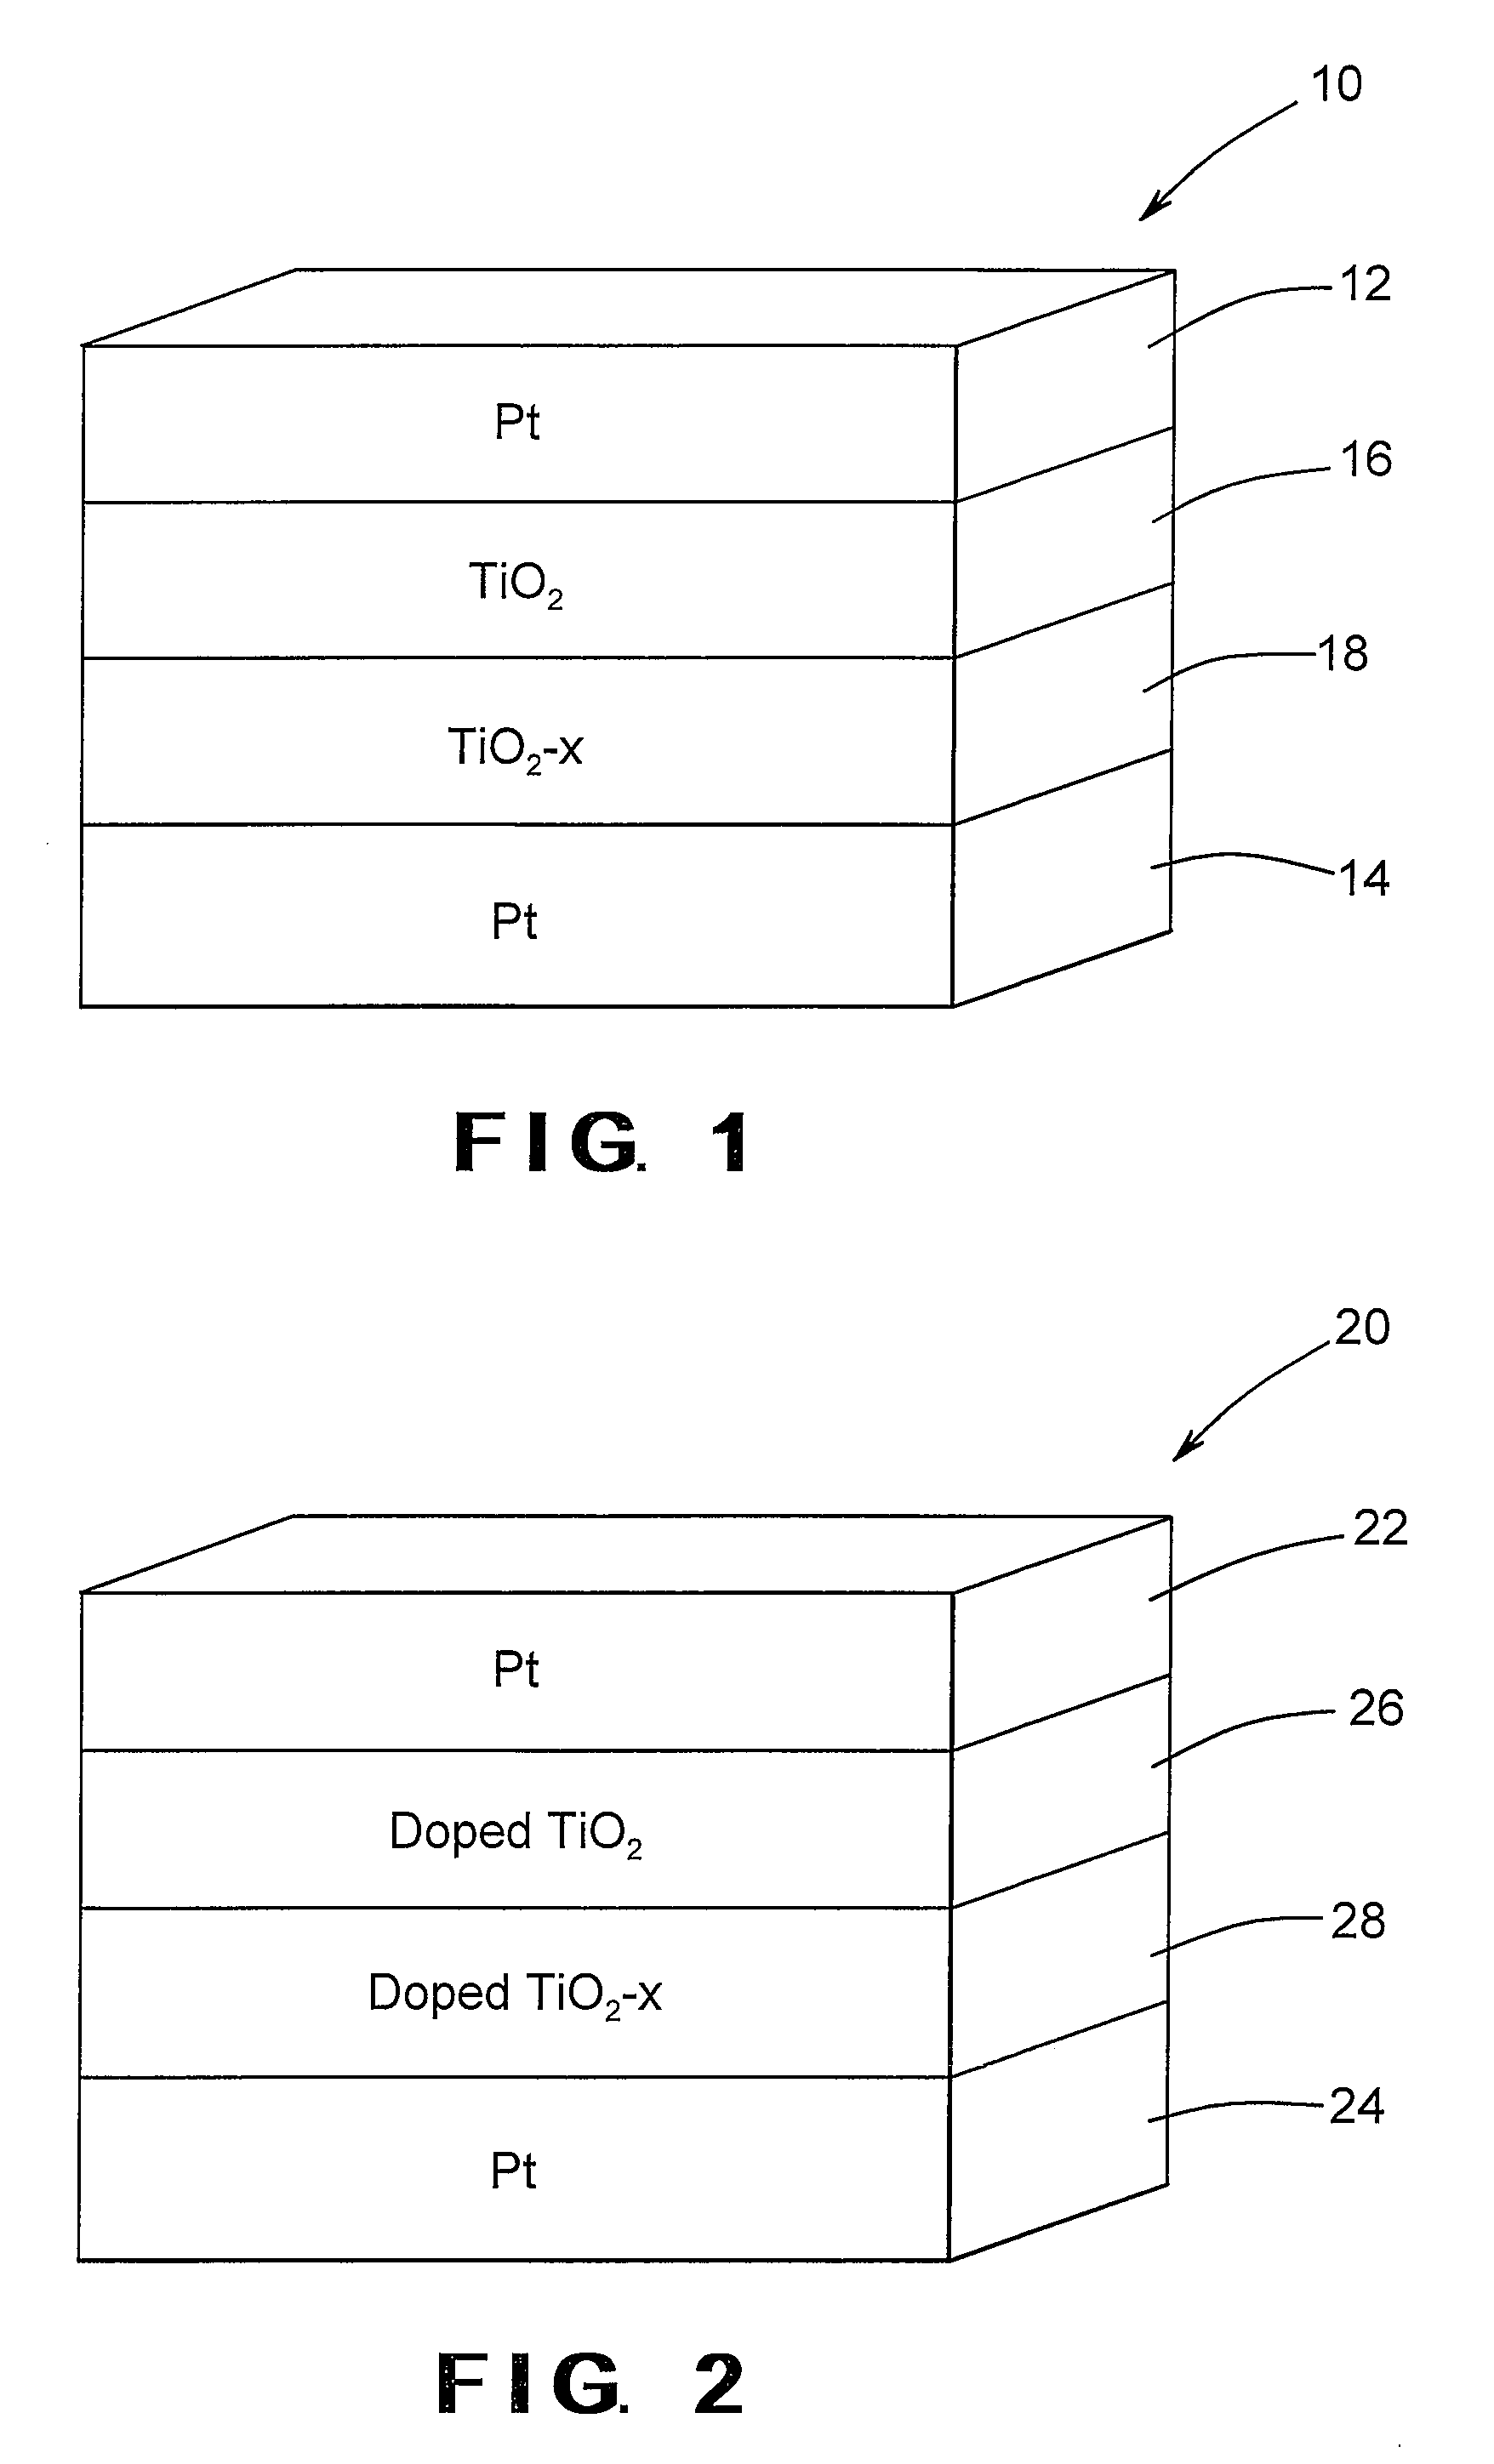 Nanoelectric memristor device with dilute magnetic semiconductors